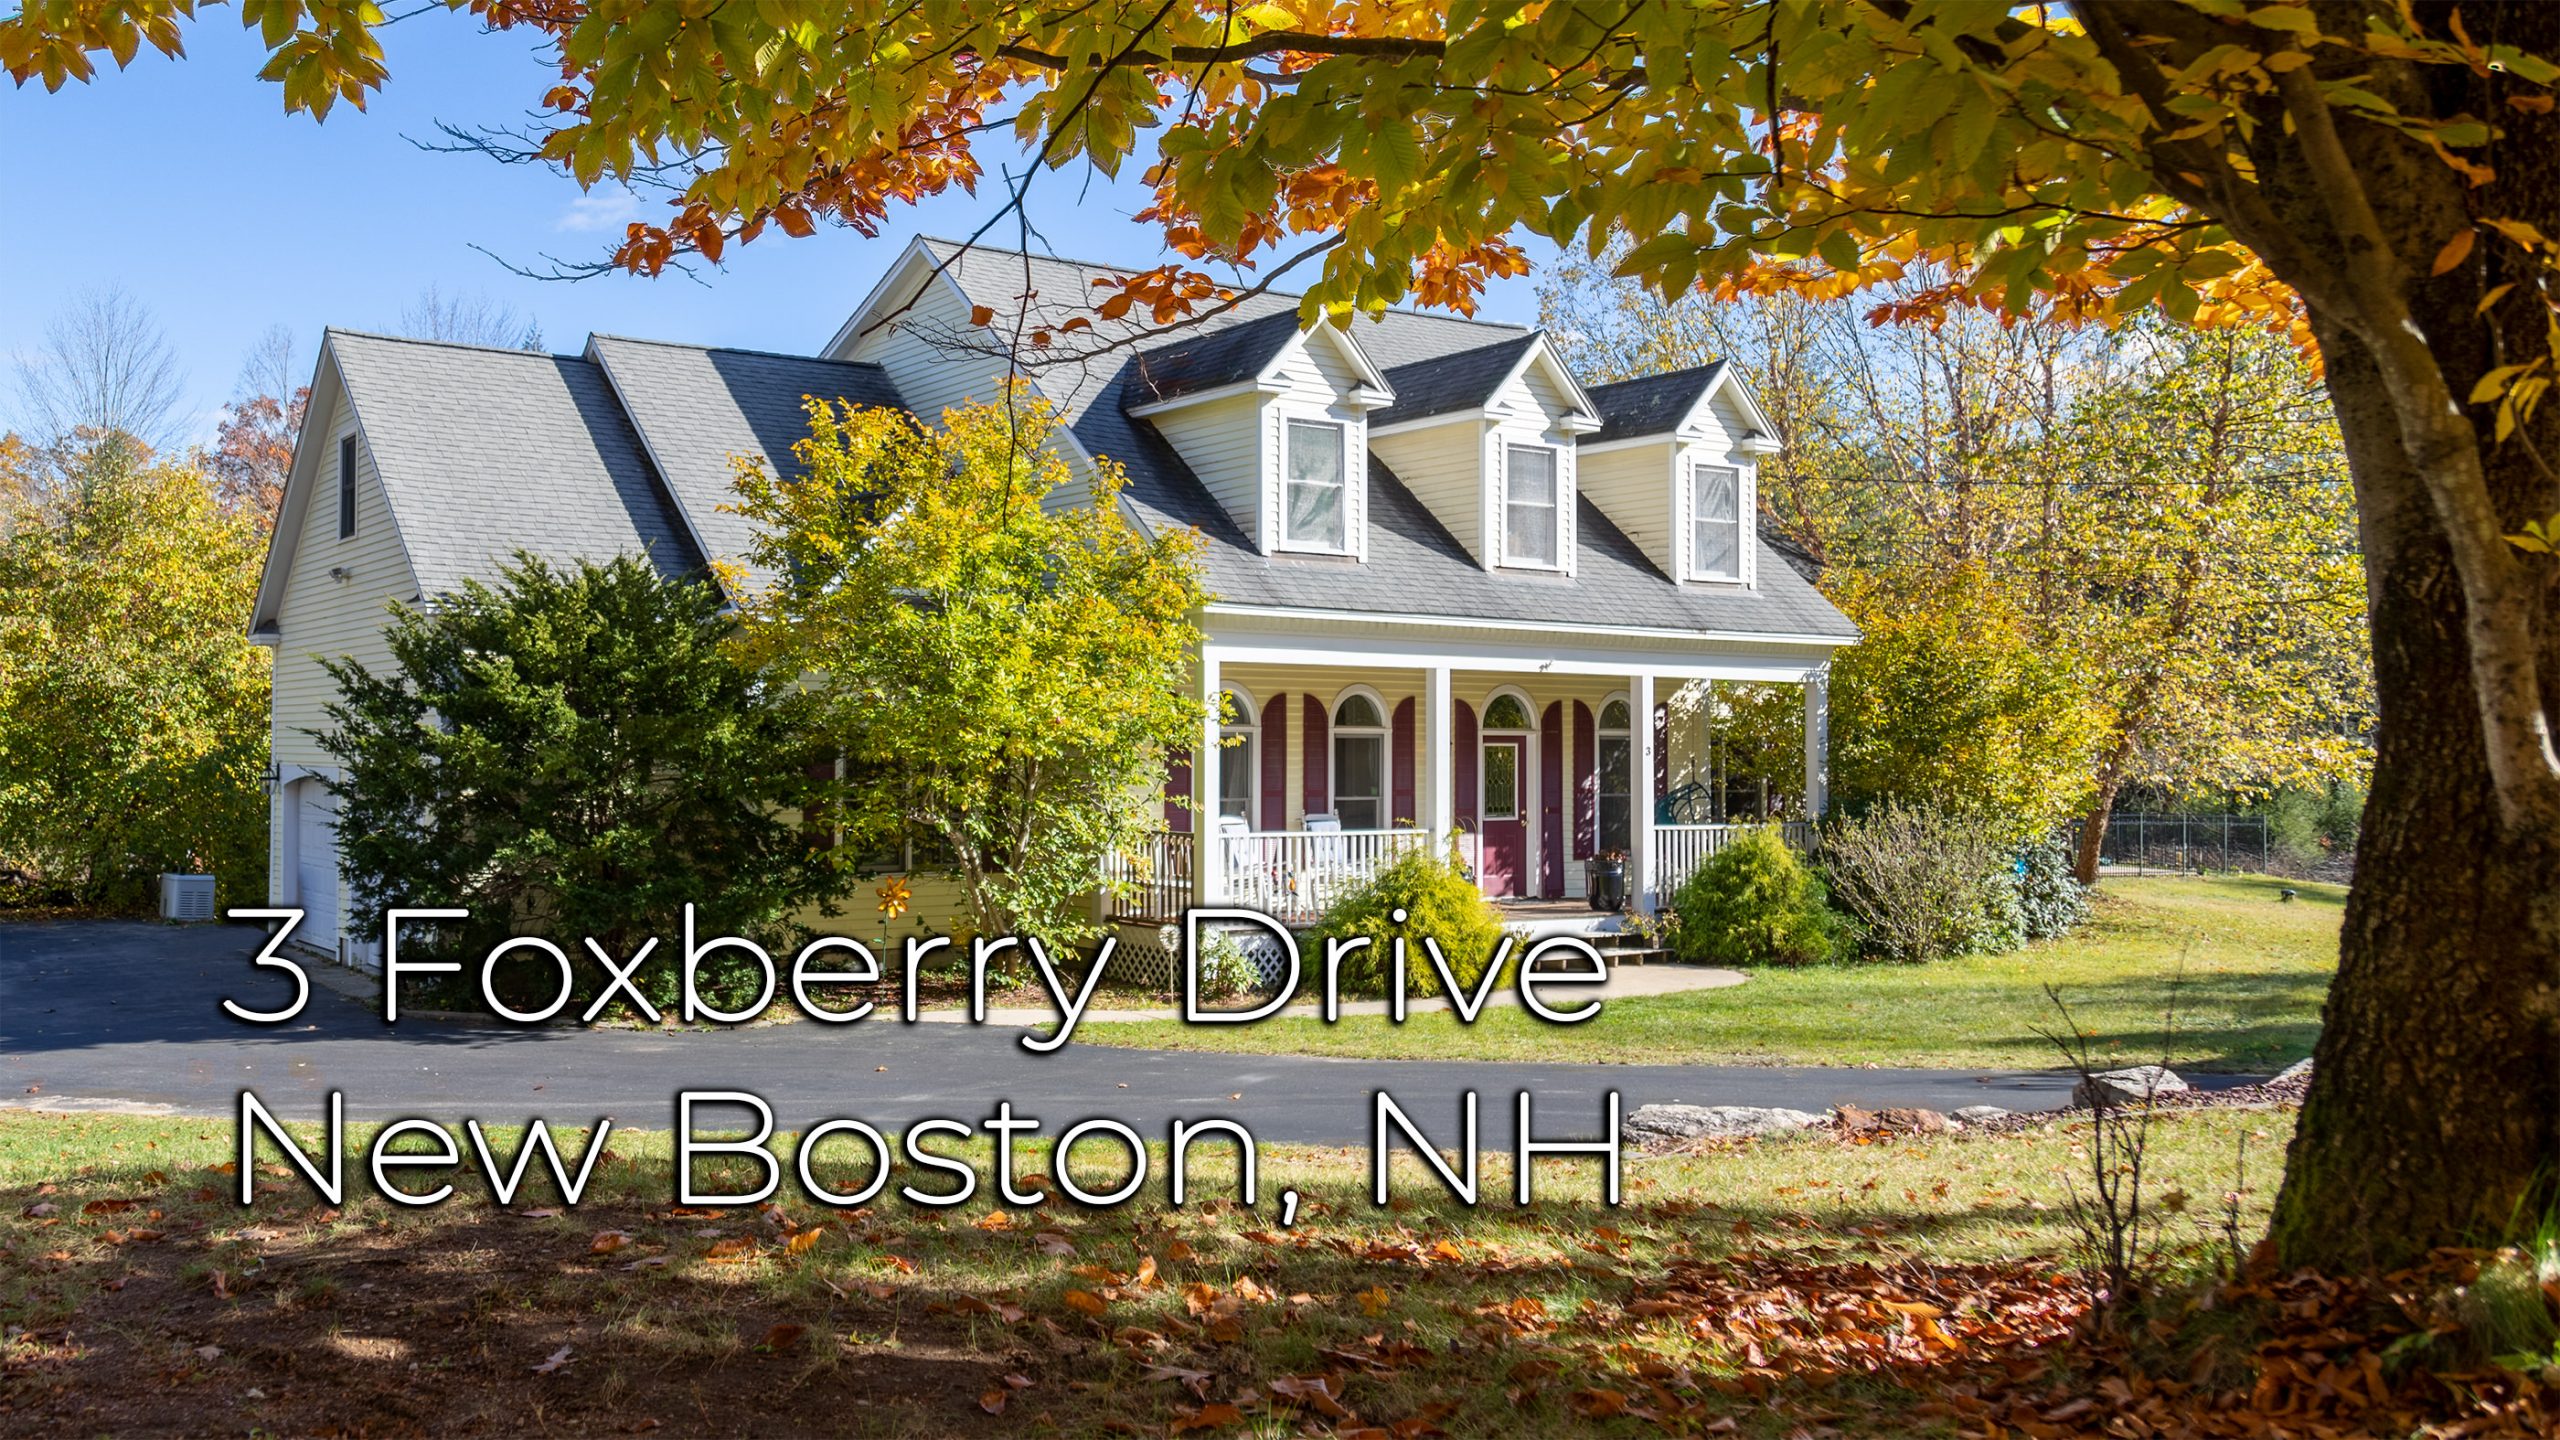 3 Foxberry Dr New Boston NH 03070